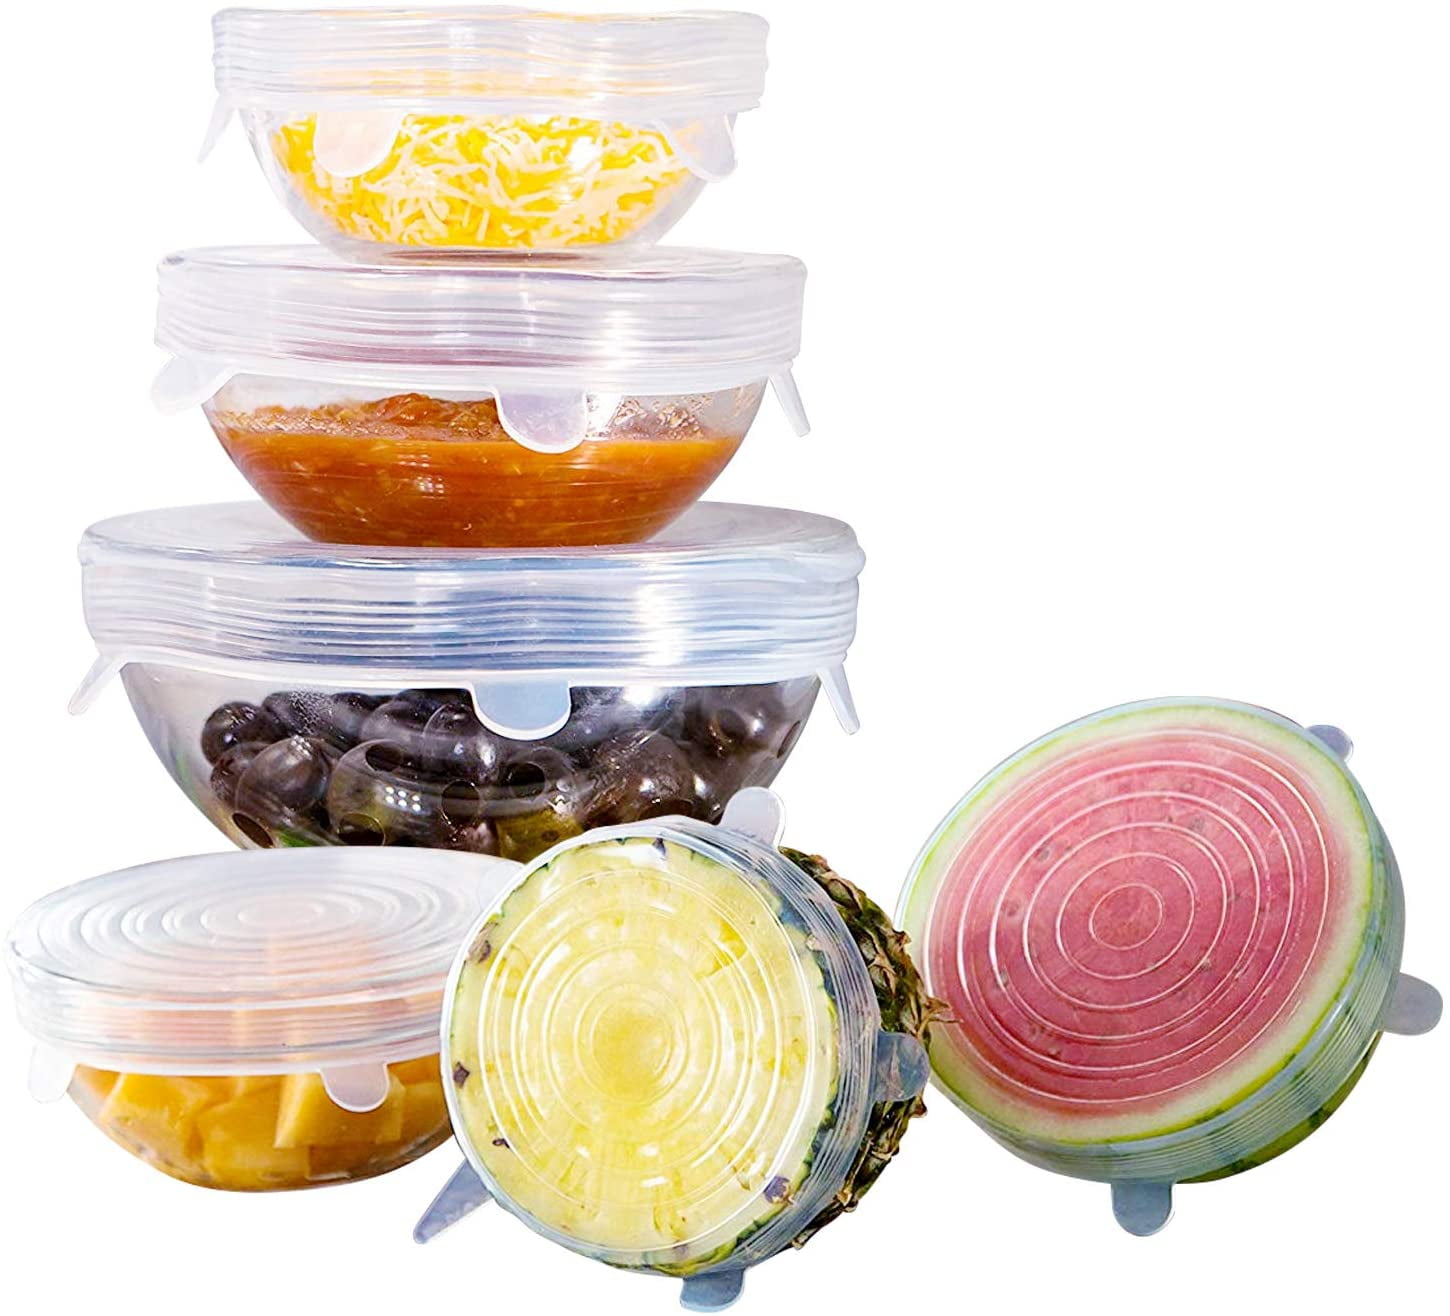 Stretch Lids Silicone Food Storage Container Lids - Reusable Premium  24-Pack - Leak-Proof & Eco-Friendly Covers for Fresh Food Storage in  Plastic